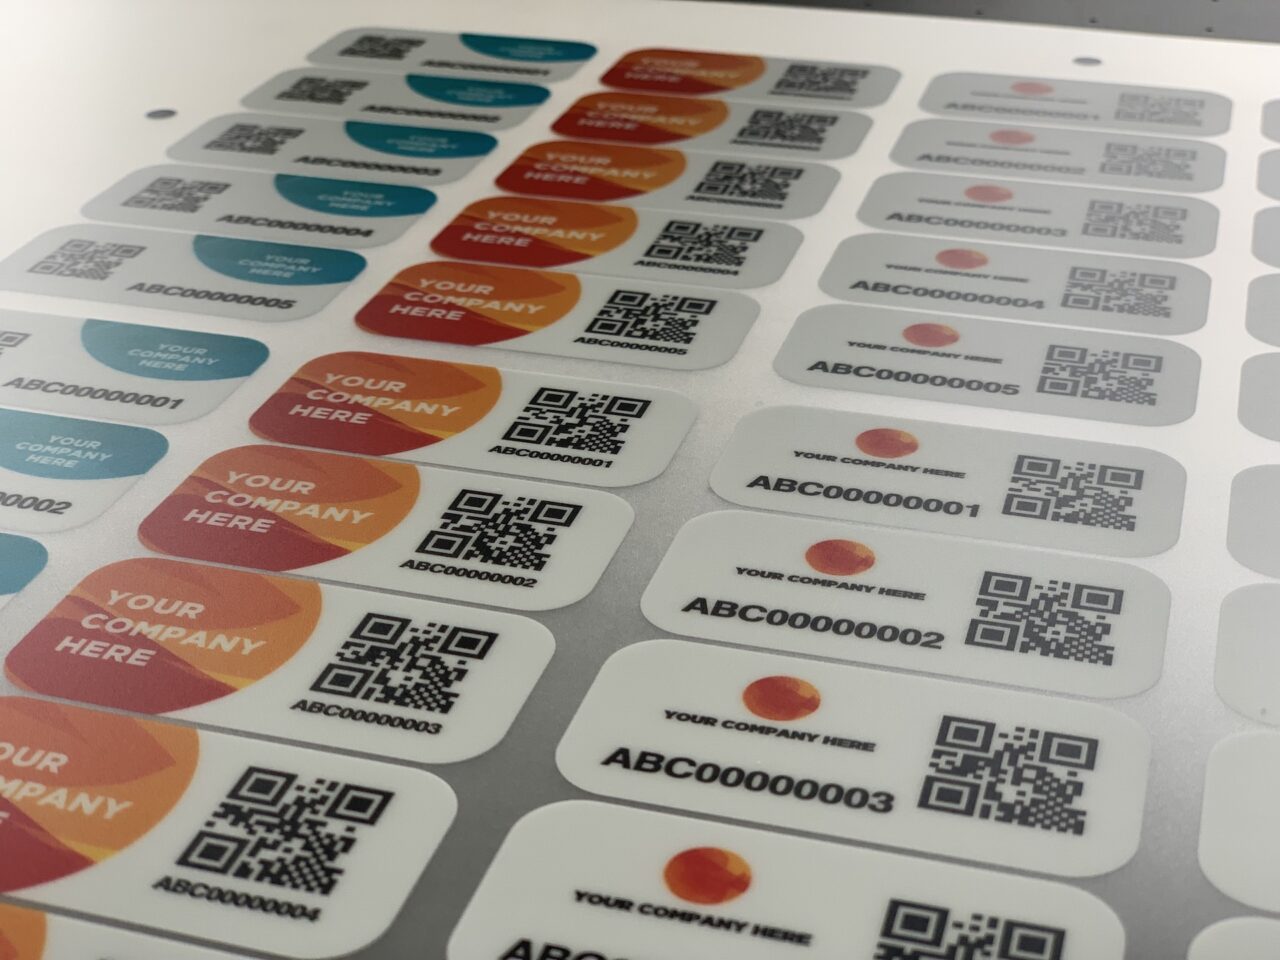 Exemple of assets labels with QR code and serial numbers